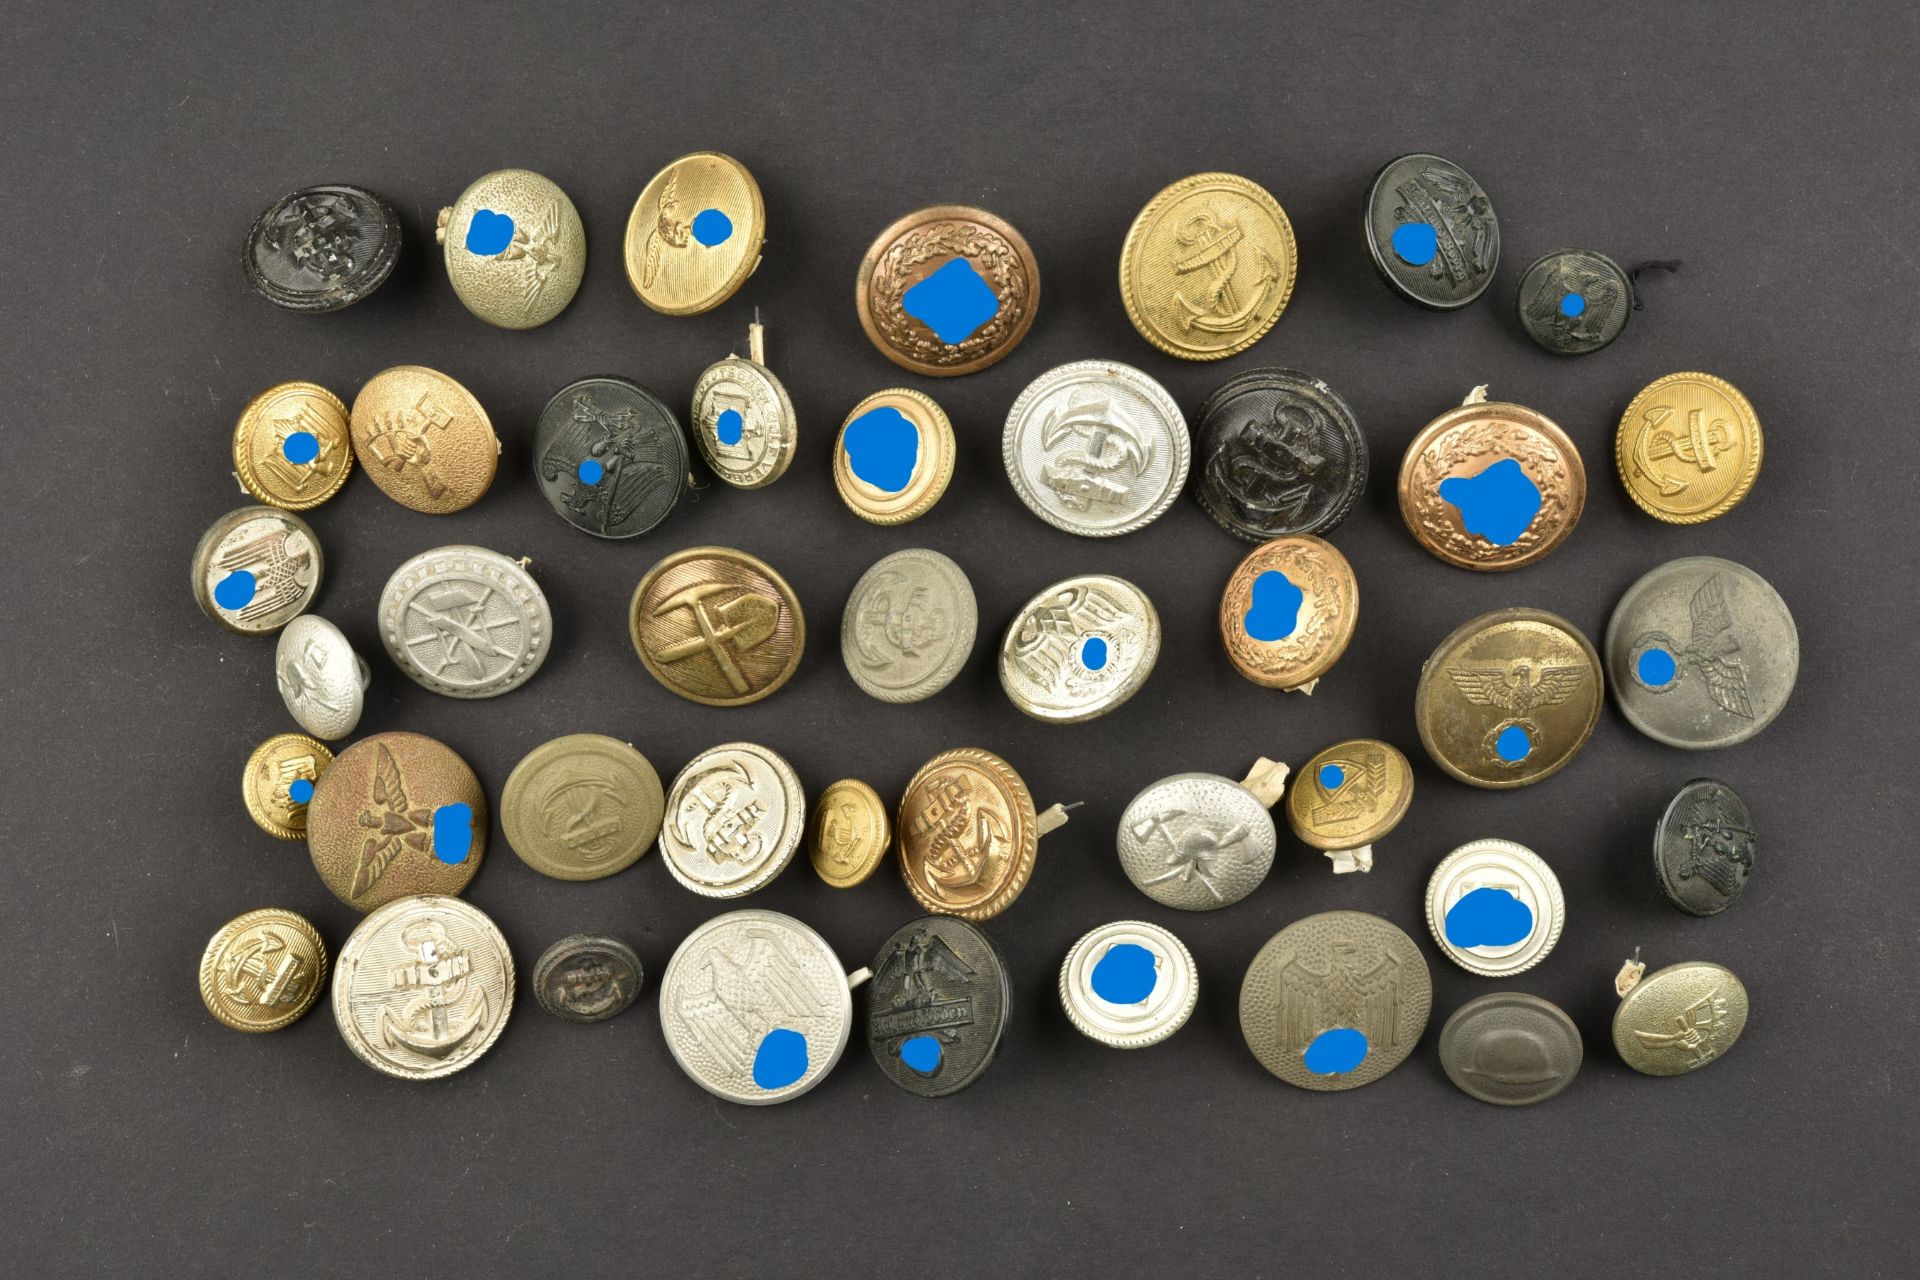 Boutons allemand. German buttons.